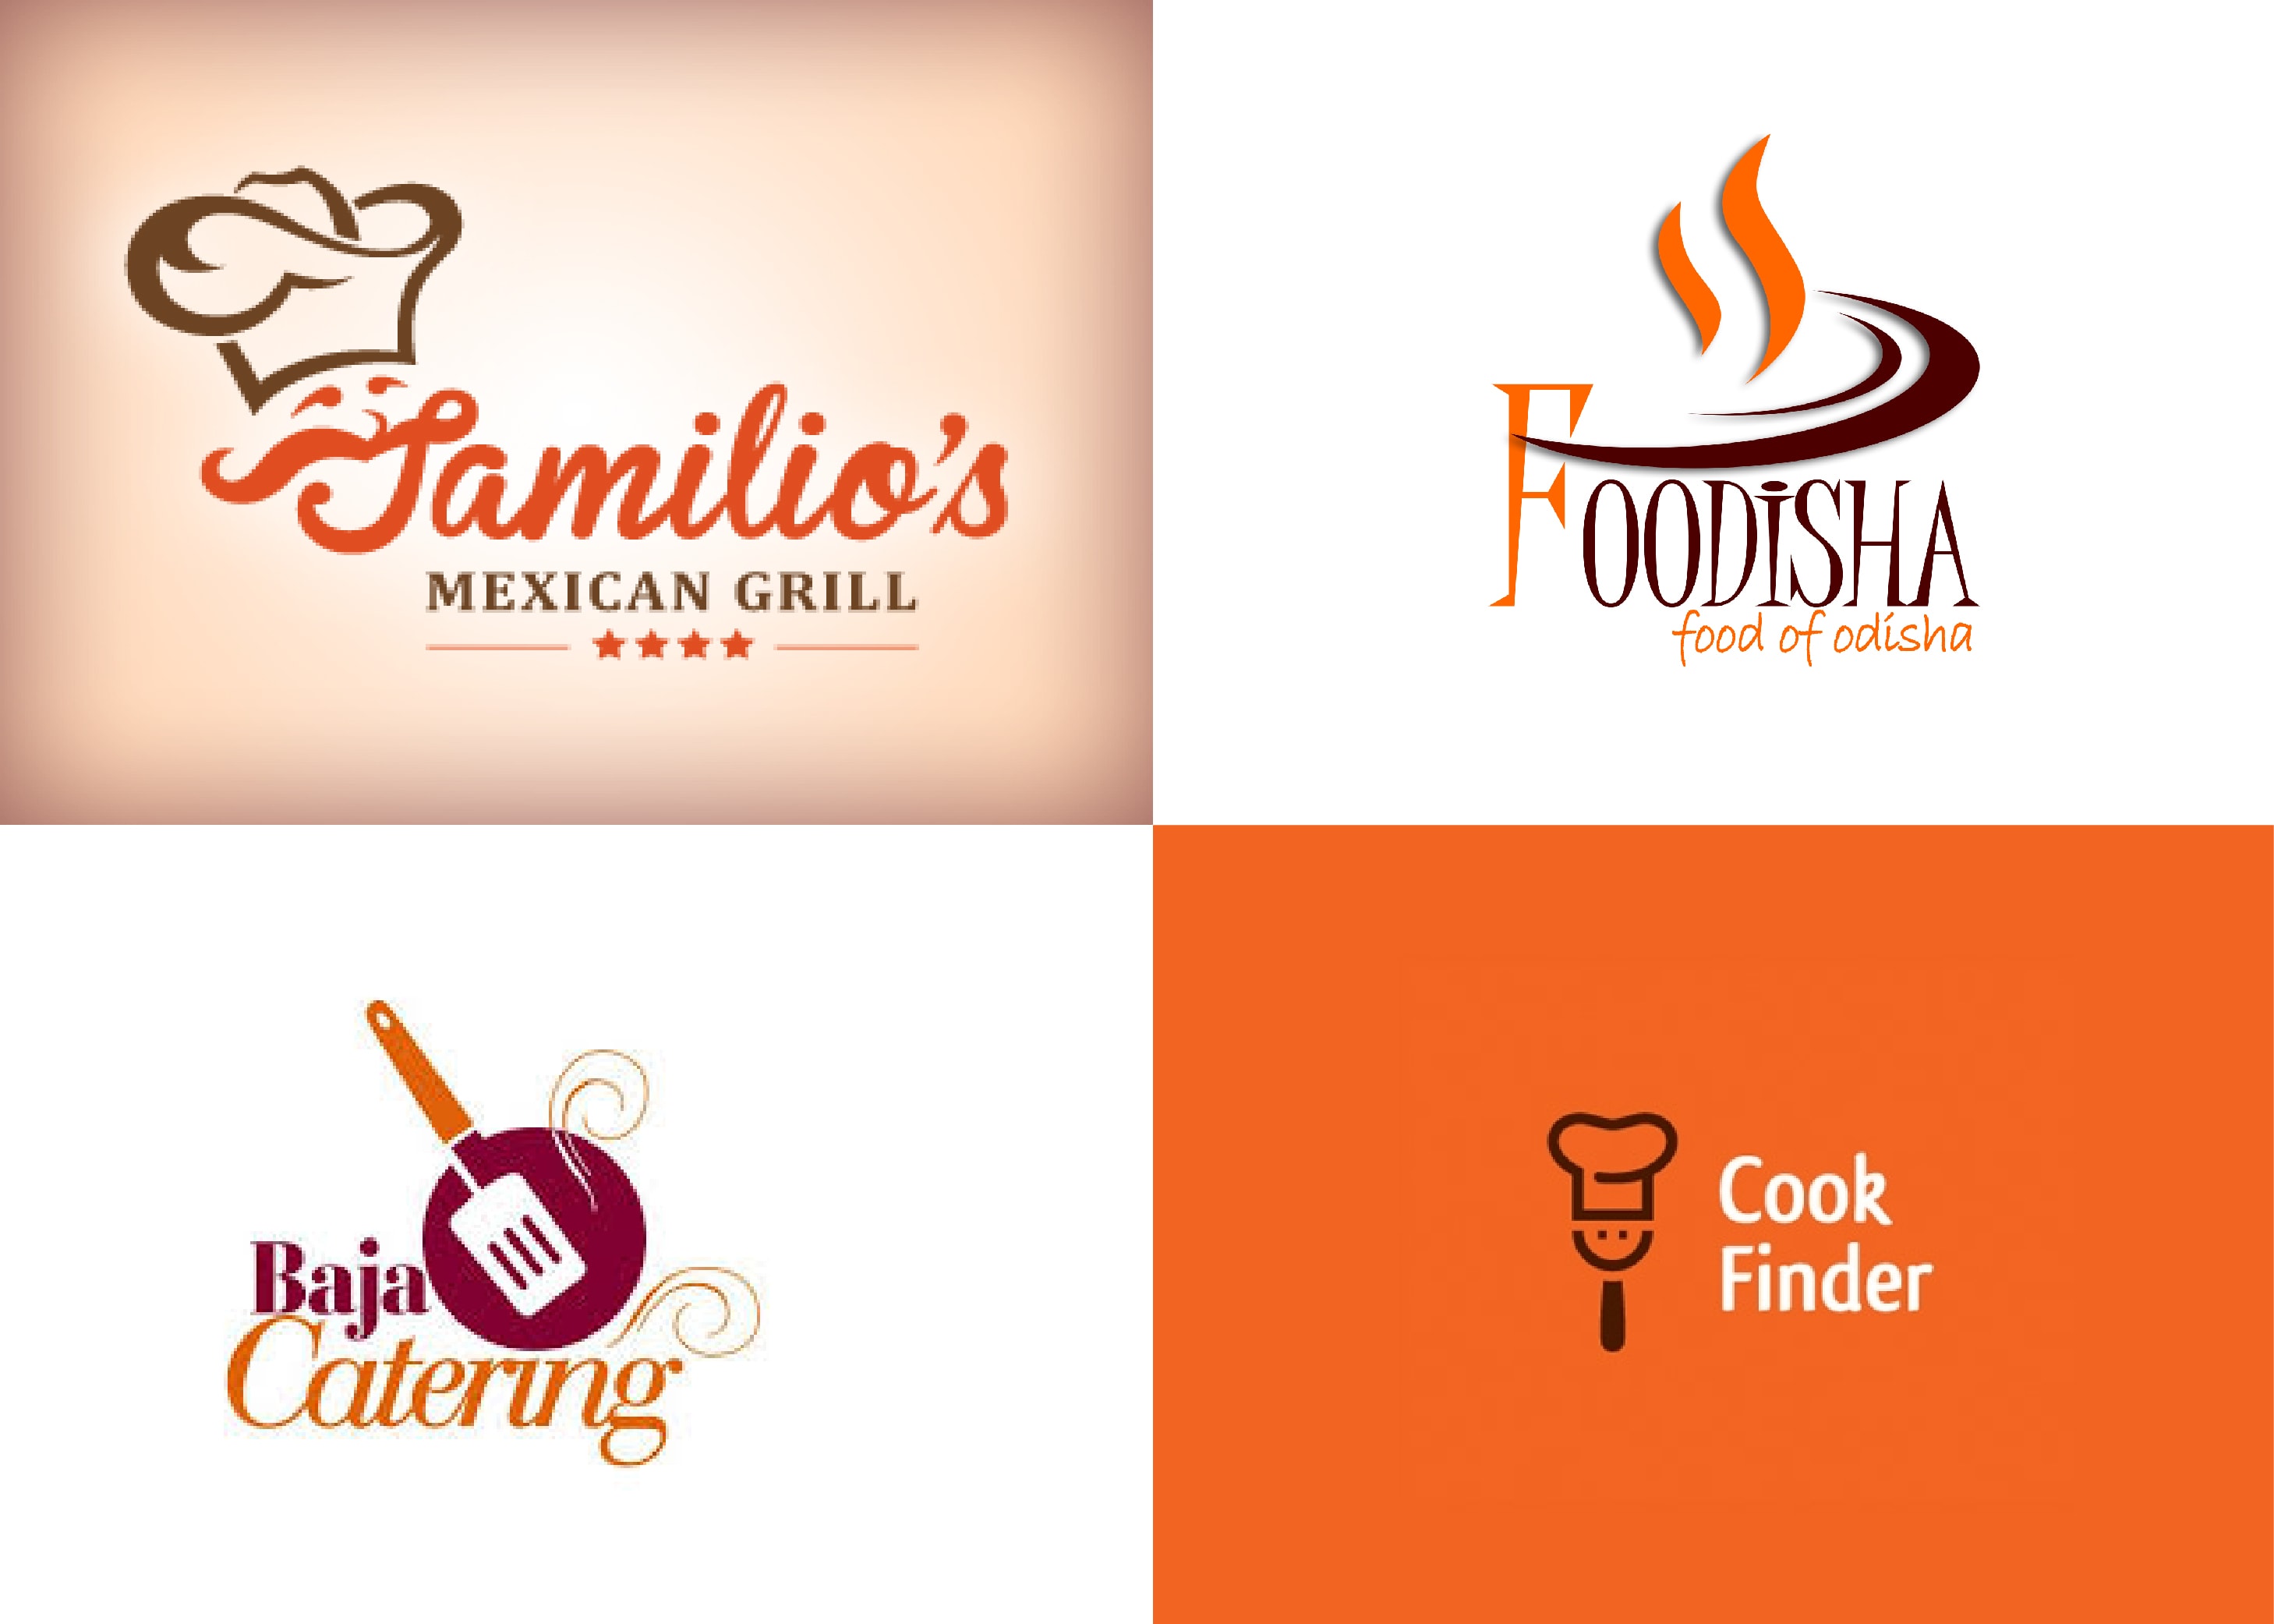 Design Food And Restaurant Logo By Ashleah43